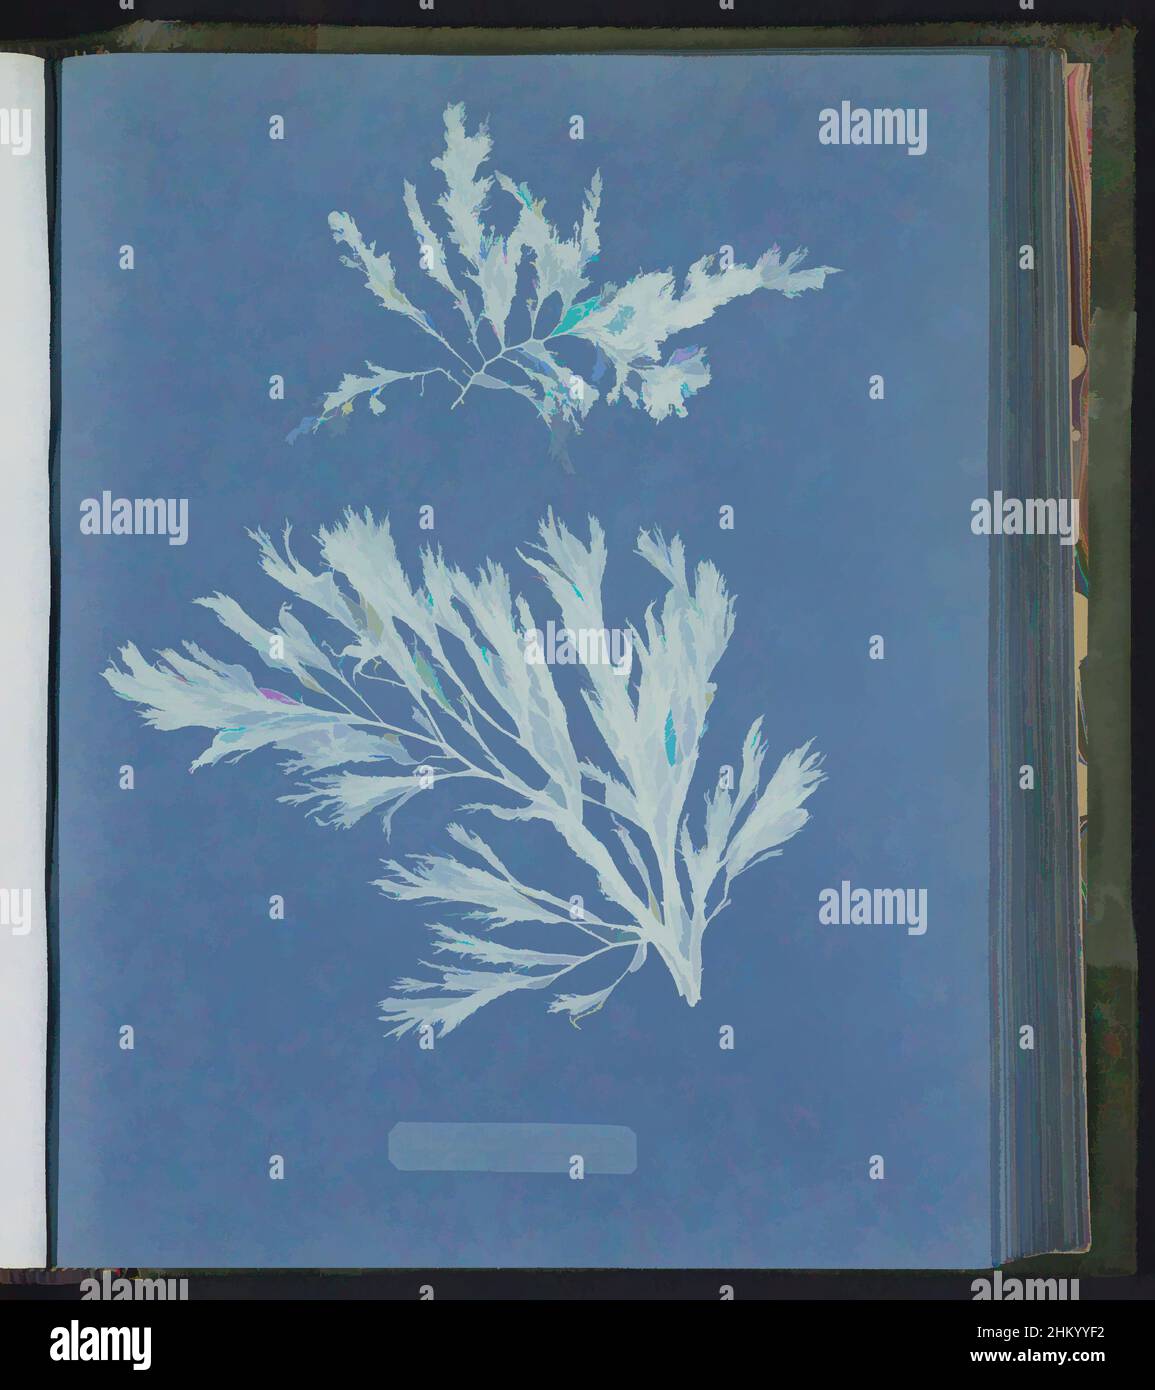 Art inspired by Polysiphonia elongata, Anna Atkins, United Kingdom, c. 1843 - c. 1853, photographic support, cyanotype, height 250 mm × width 200 mm, Classic works modernized by Artotop with a splash of modernity. Shapes, color and value, eye-catching visual impact on art. Emotions through freedom of artworks in a contemporary way. A timeless message pursuing a wildly creative new direction. Artists turning to the digital medium and creating the Artotop NFT Stock Photo